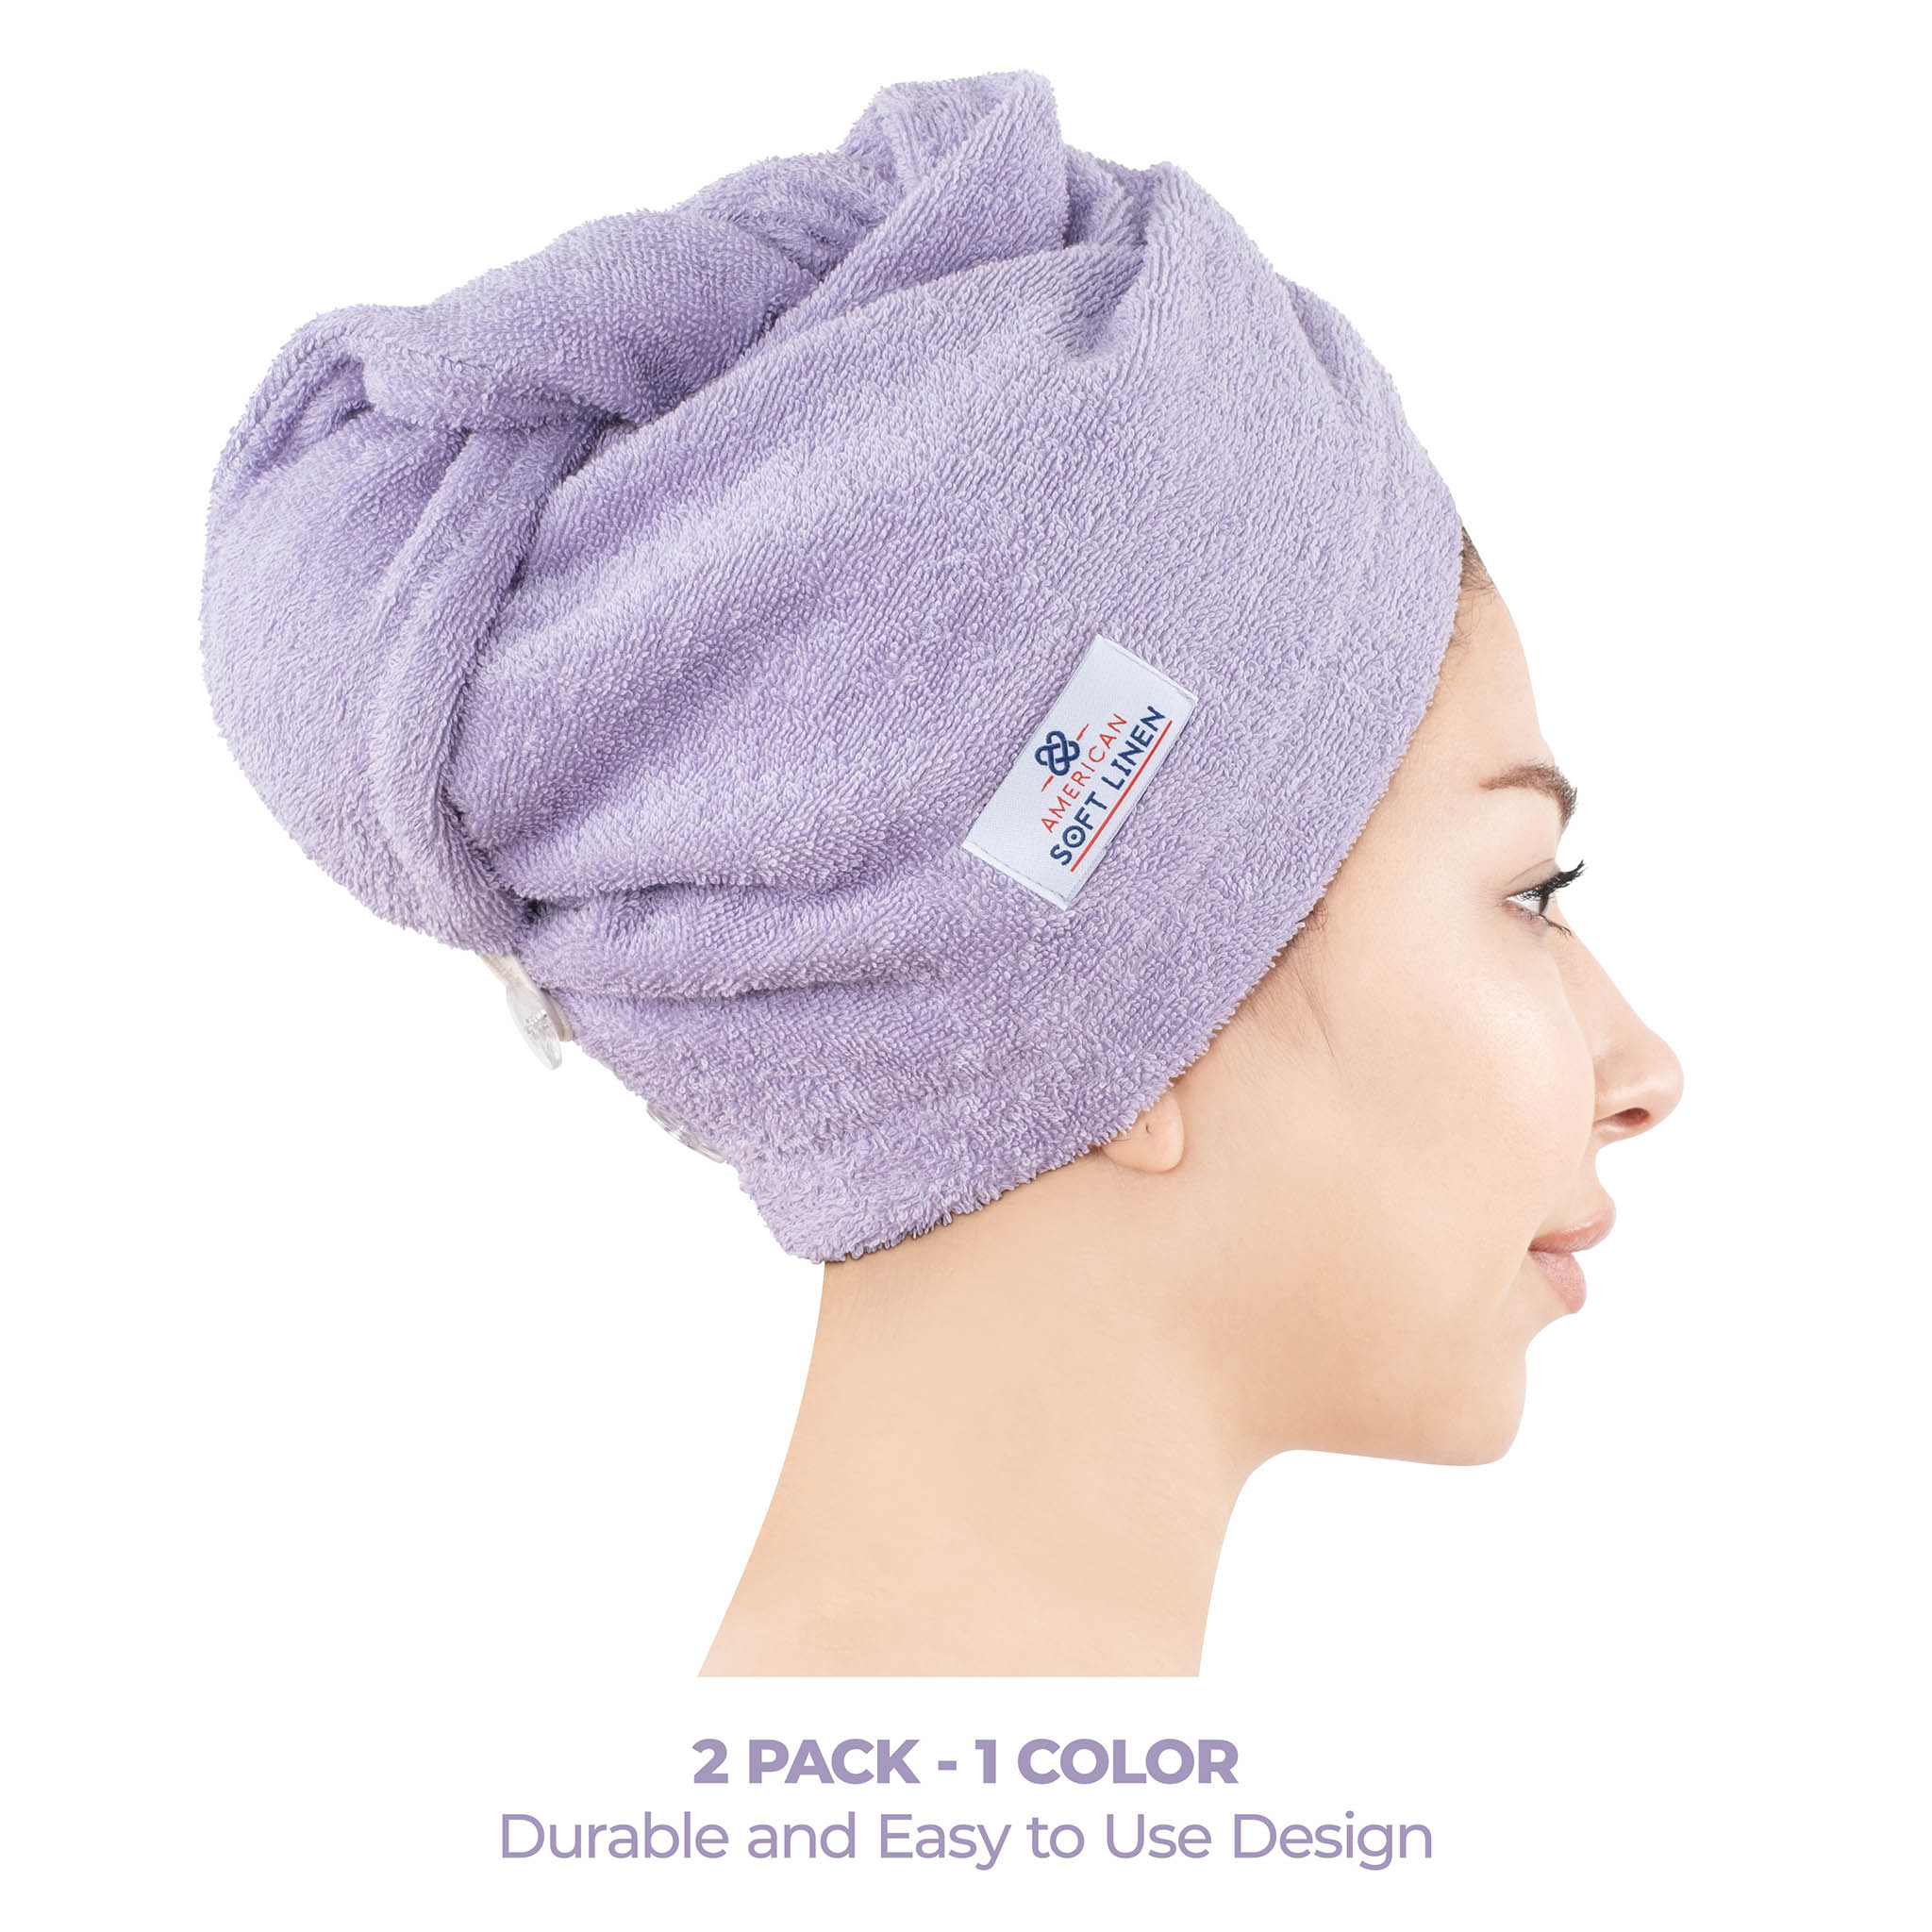 American Soft Linen 100% Cotton Hair Drying Towels for Women 2 pack 75 set case pack lilac-2